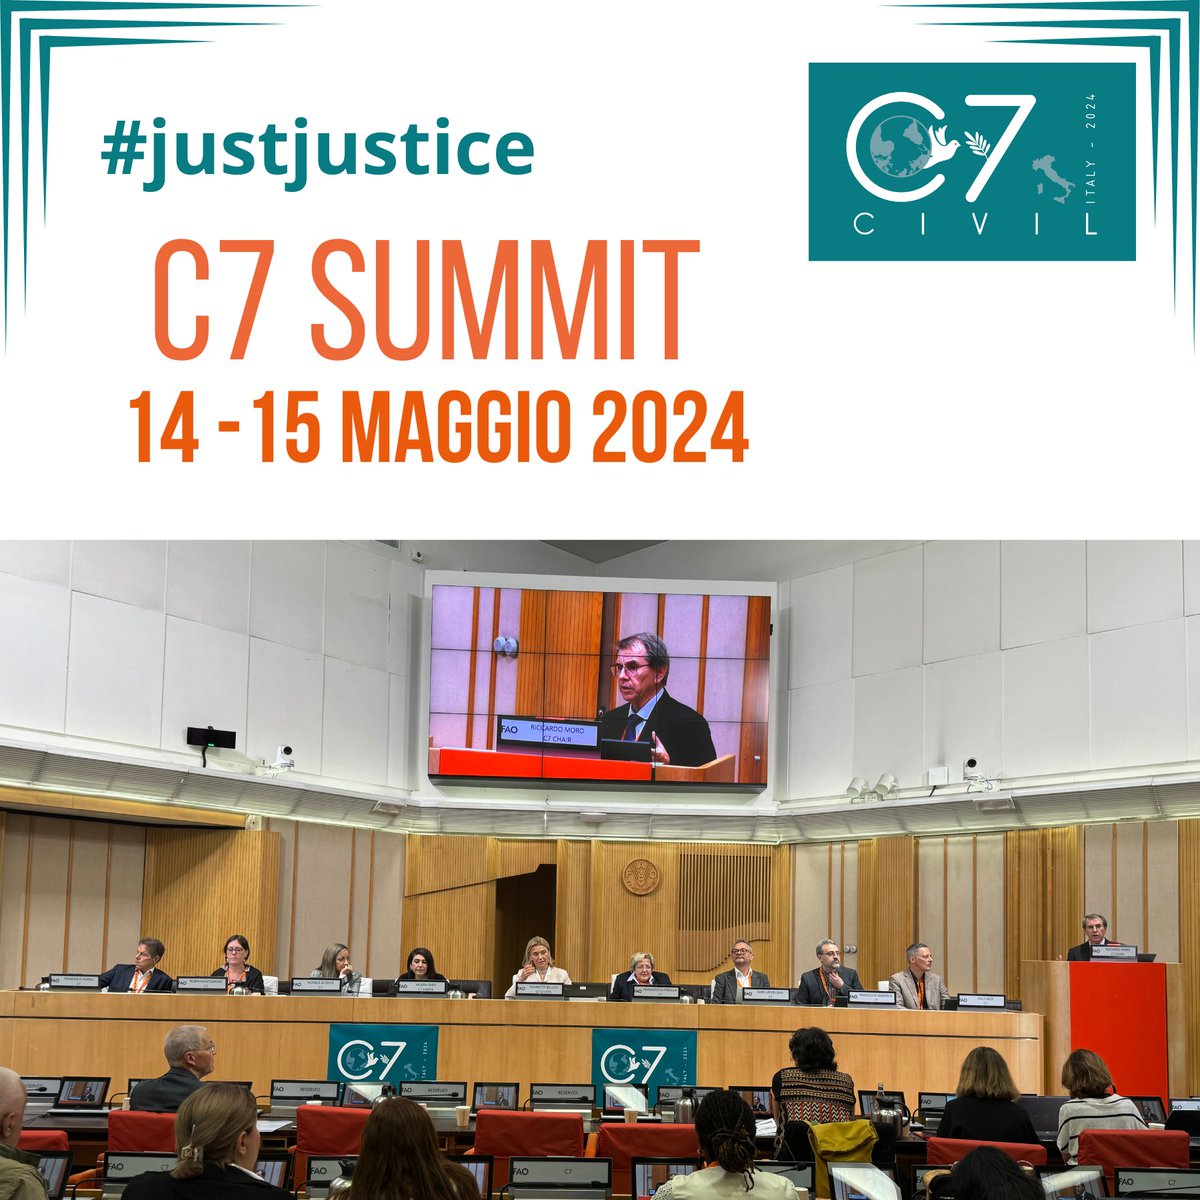 #justjustice C7 Sherpa Valeria Emmi opens the first plenary session during which the C7 Communiqué 2024 will be officially handed over to the G7 Sherpa, Ambassador Elisabetta Belloni #civil72024, #g7italy, #g7ITA, #civil7Italy